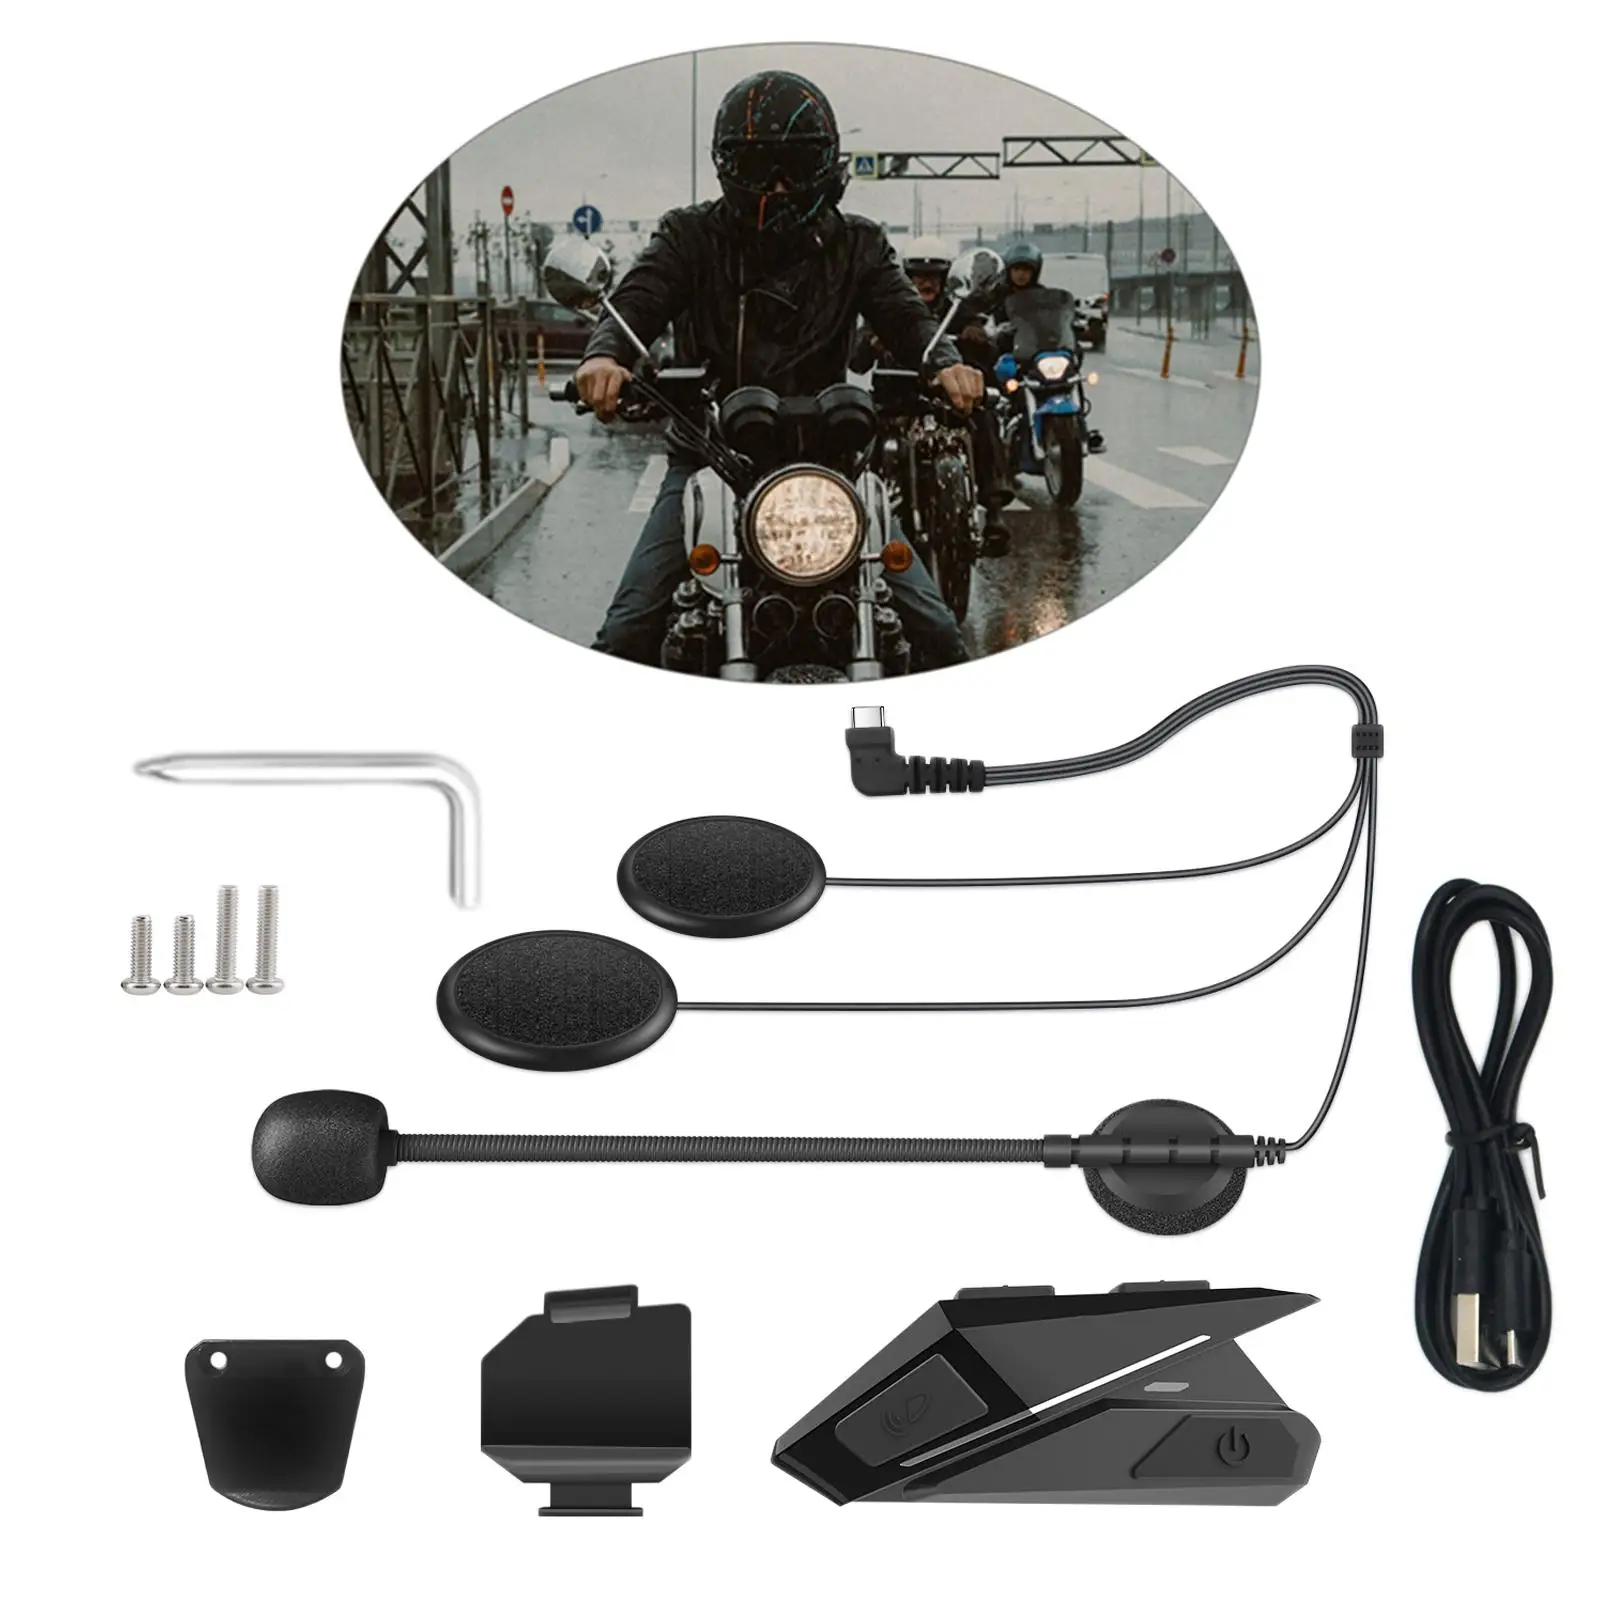 Handsfree Motorcycle Bluetooth 5.0 Headset Noise-Canceling Headphone for Most Helmets